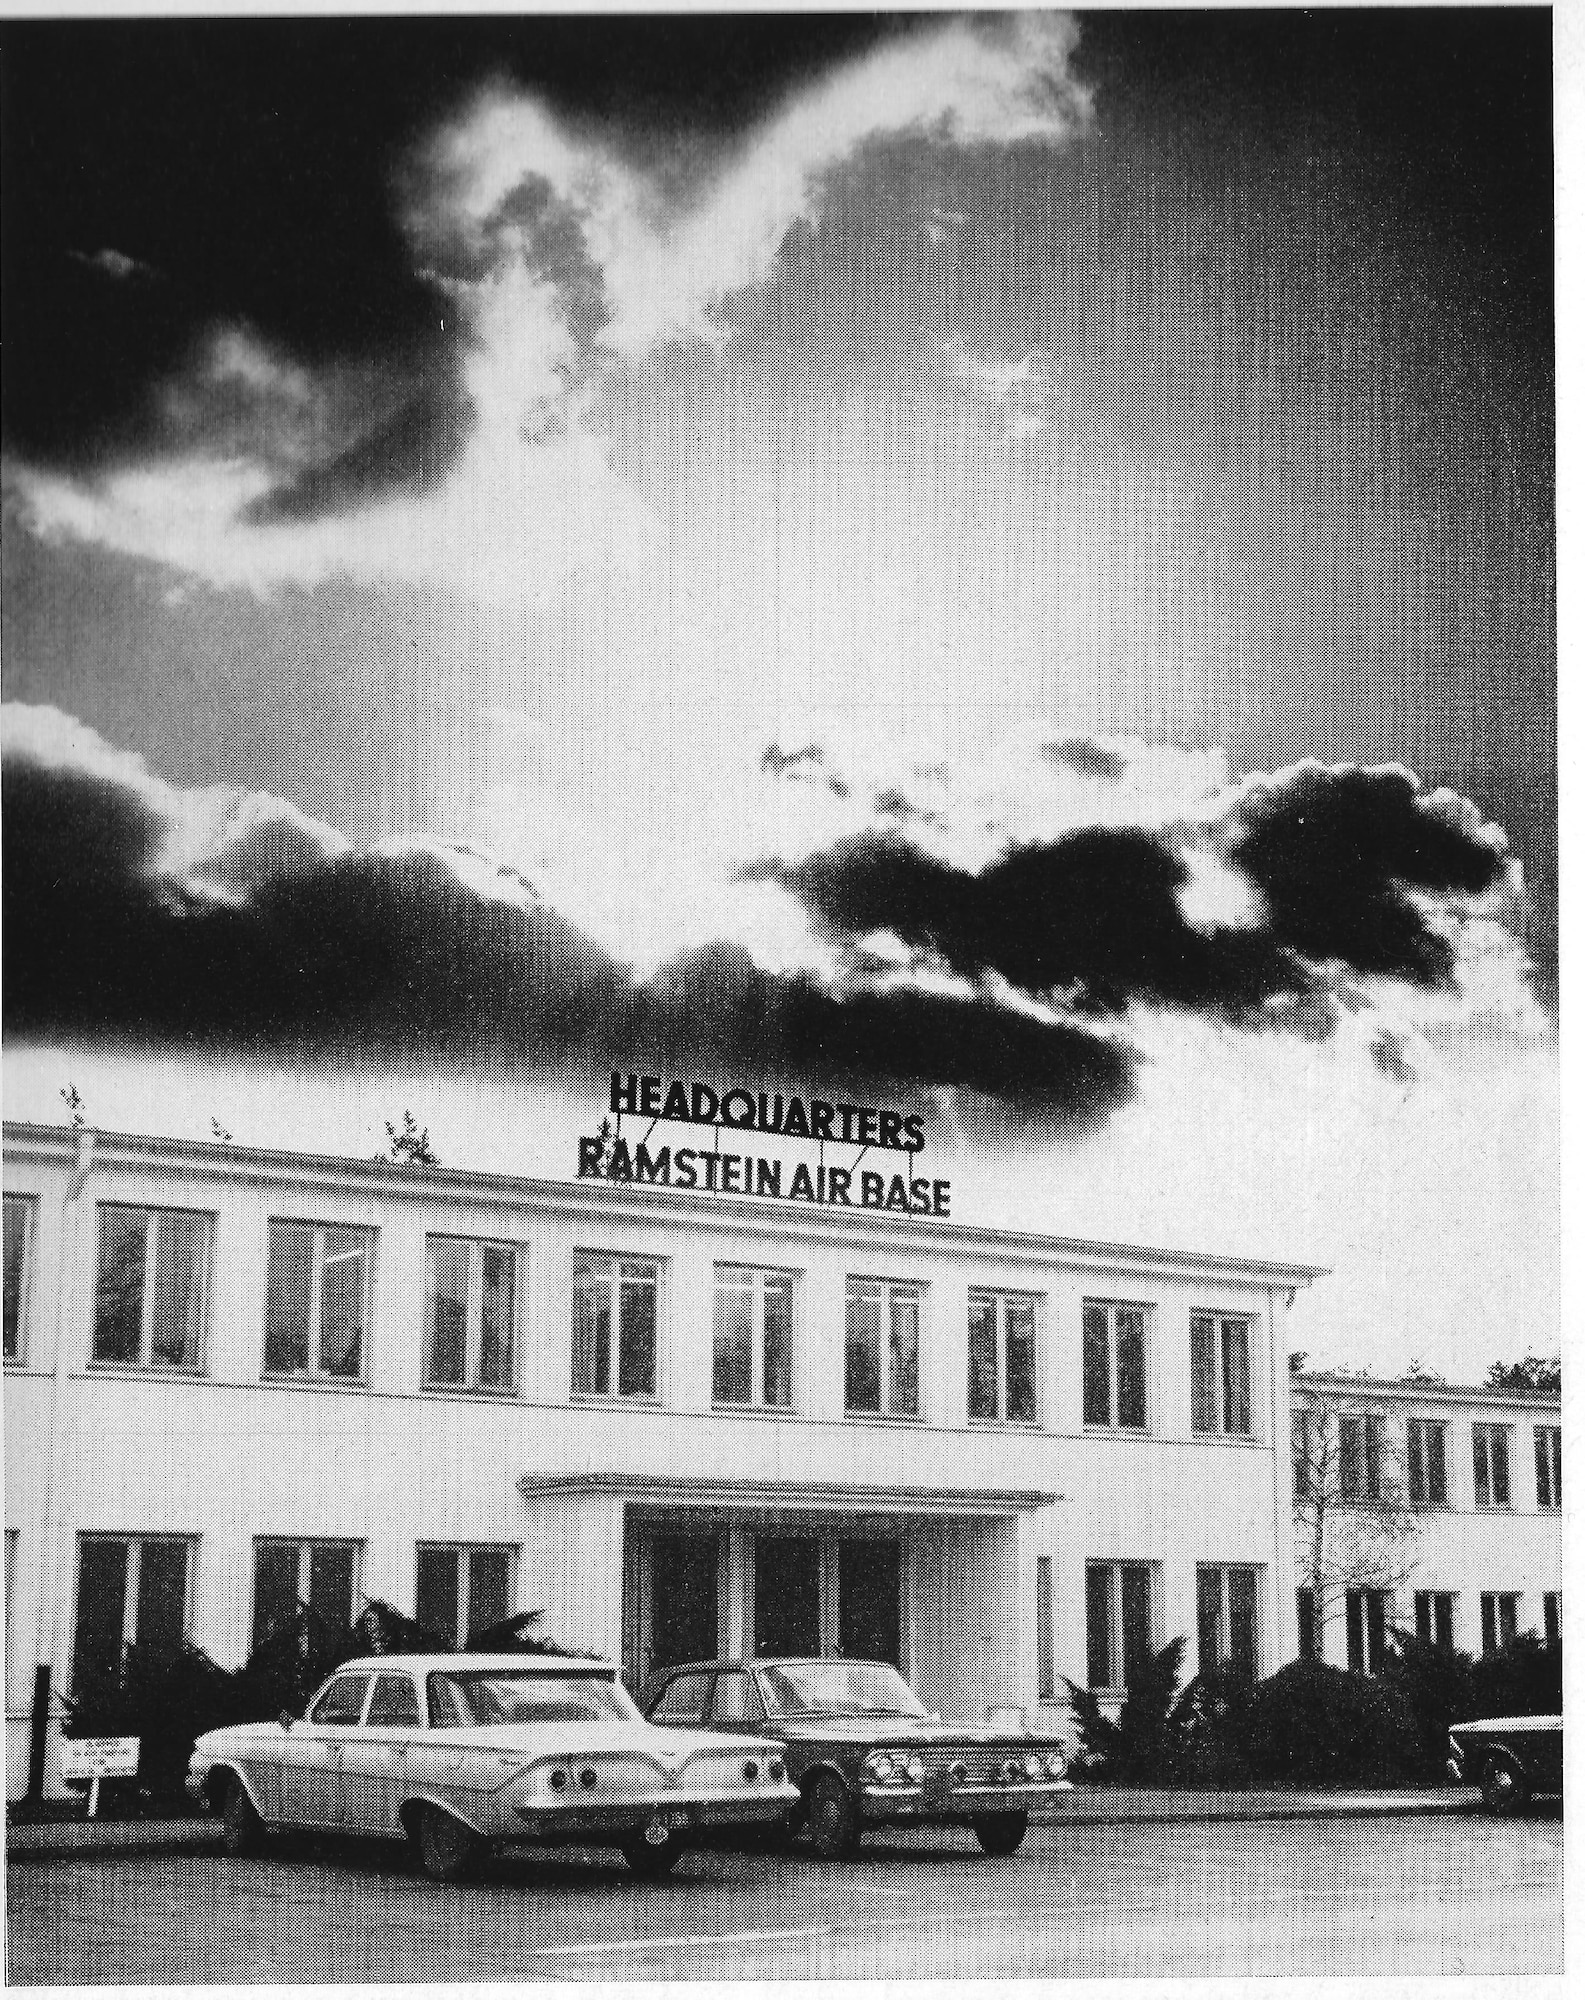 Ramstein Air Base headquarters pictured during the 1960s.